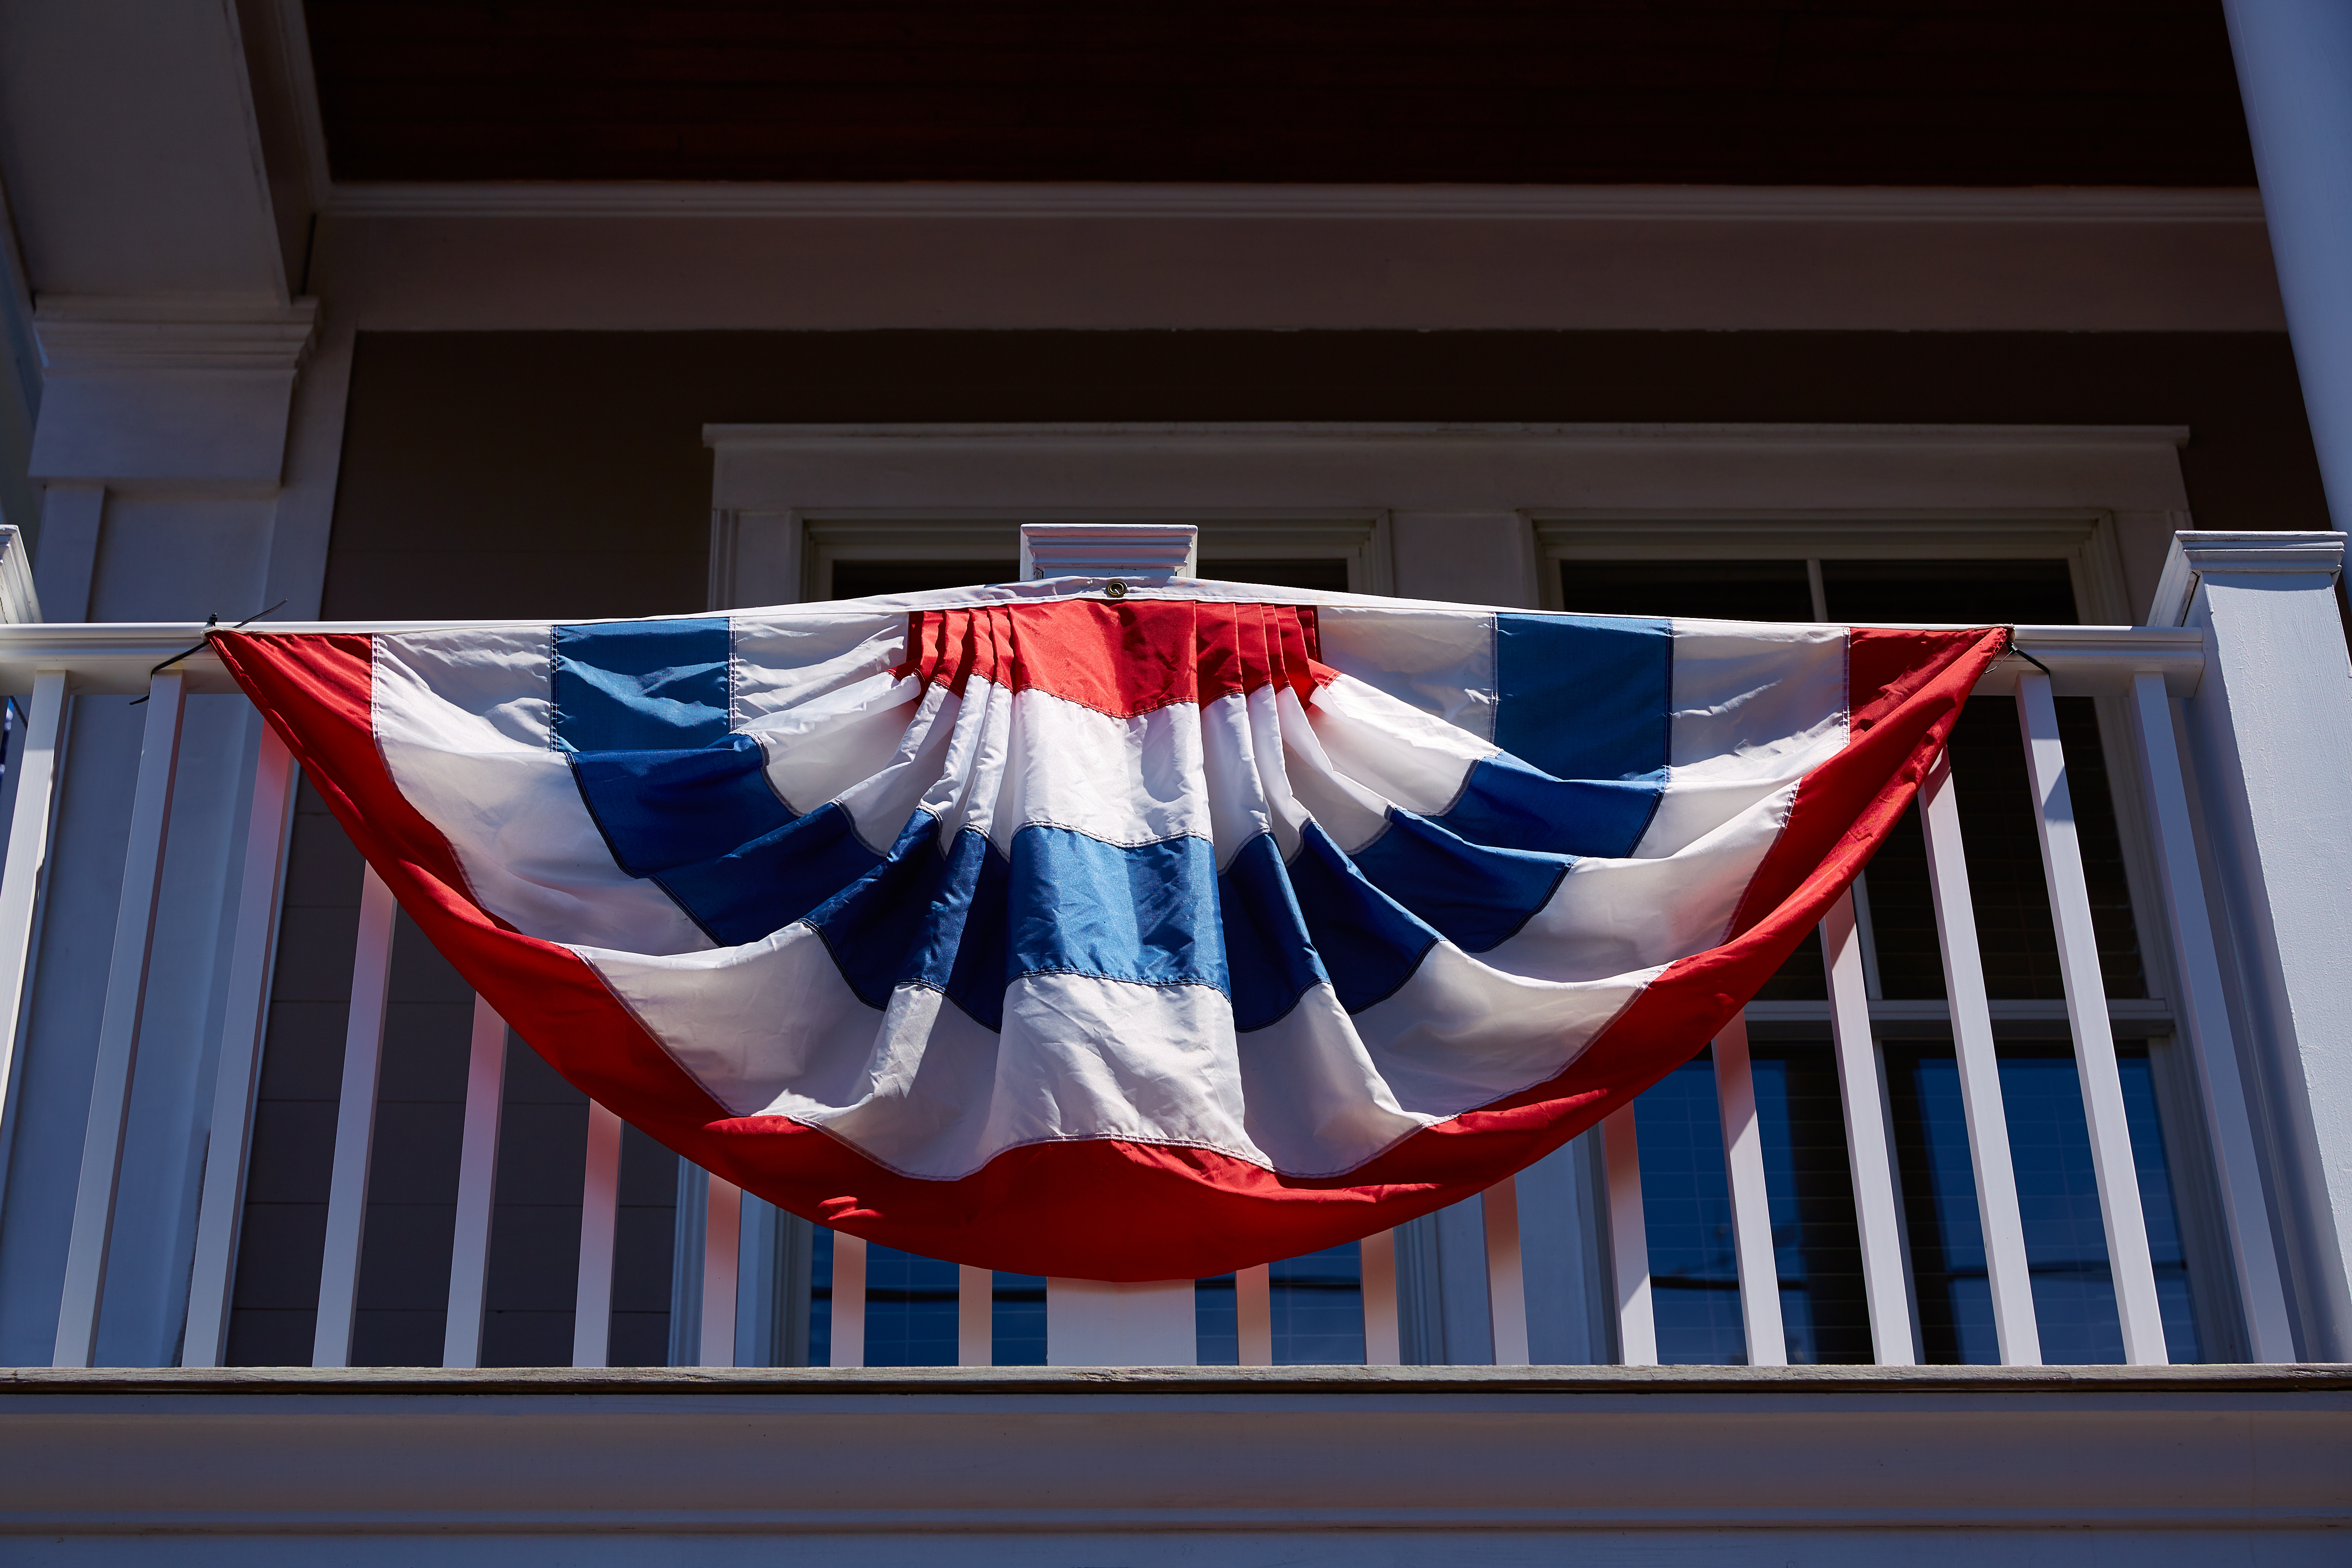 blog image of american flag on an apartment balcony; blog title: 3 Ways to Celebrate the True Meaning of Memorial Day